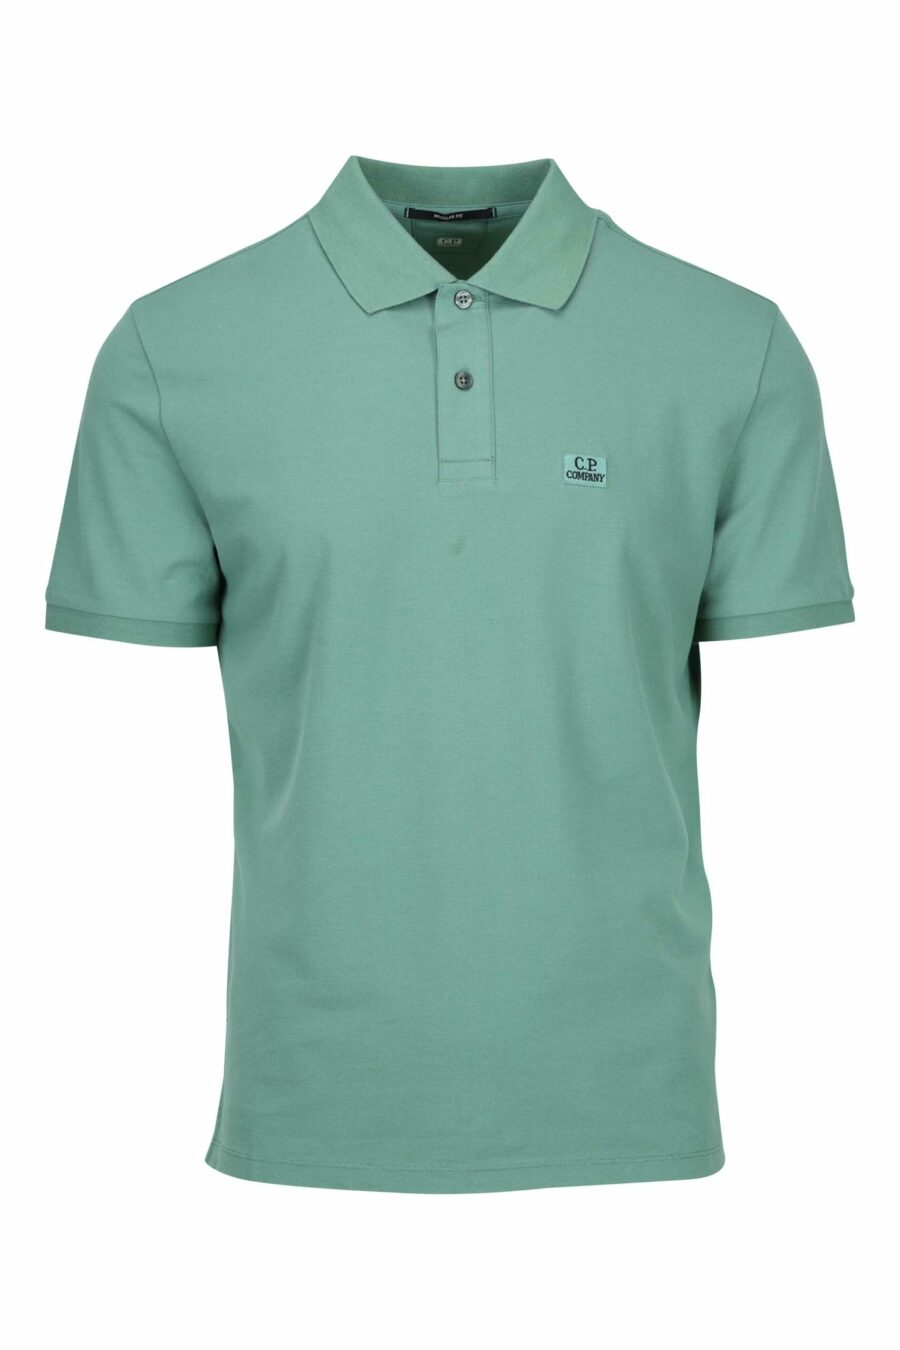 Military green polo shirt with mini logo patch "cp" - 7620943675924 scaled